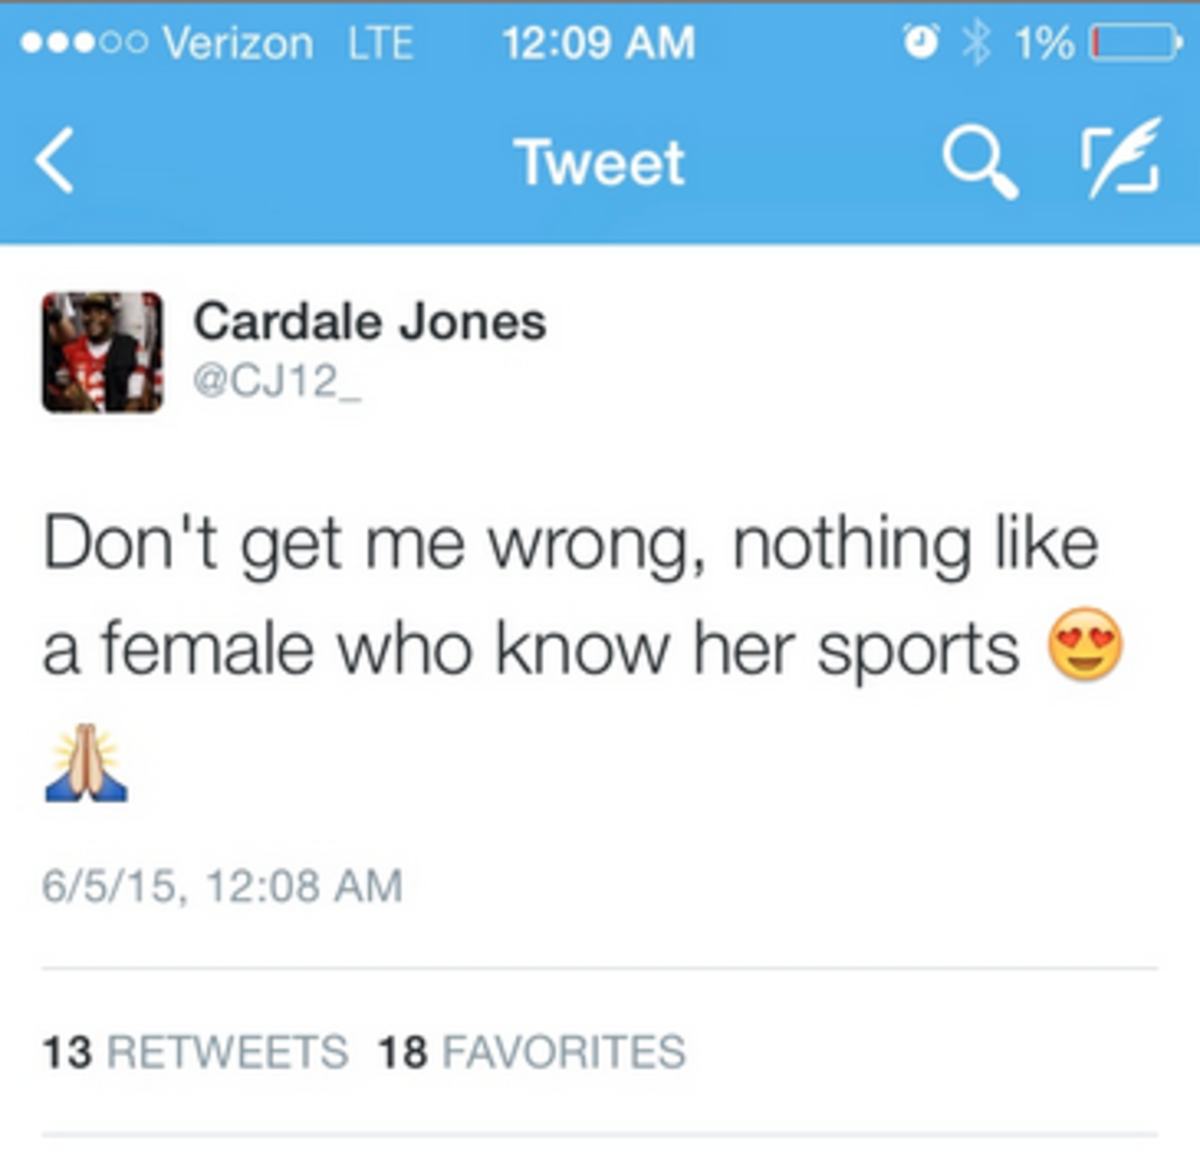 Cardale Jones tweets about women who know sports.